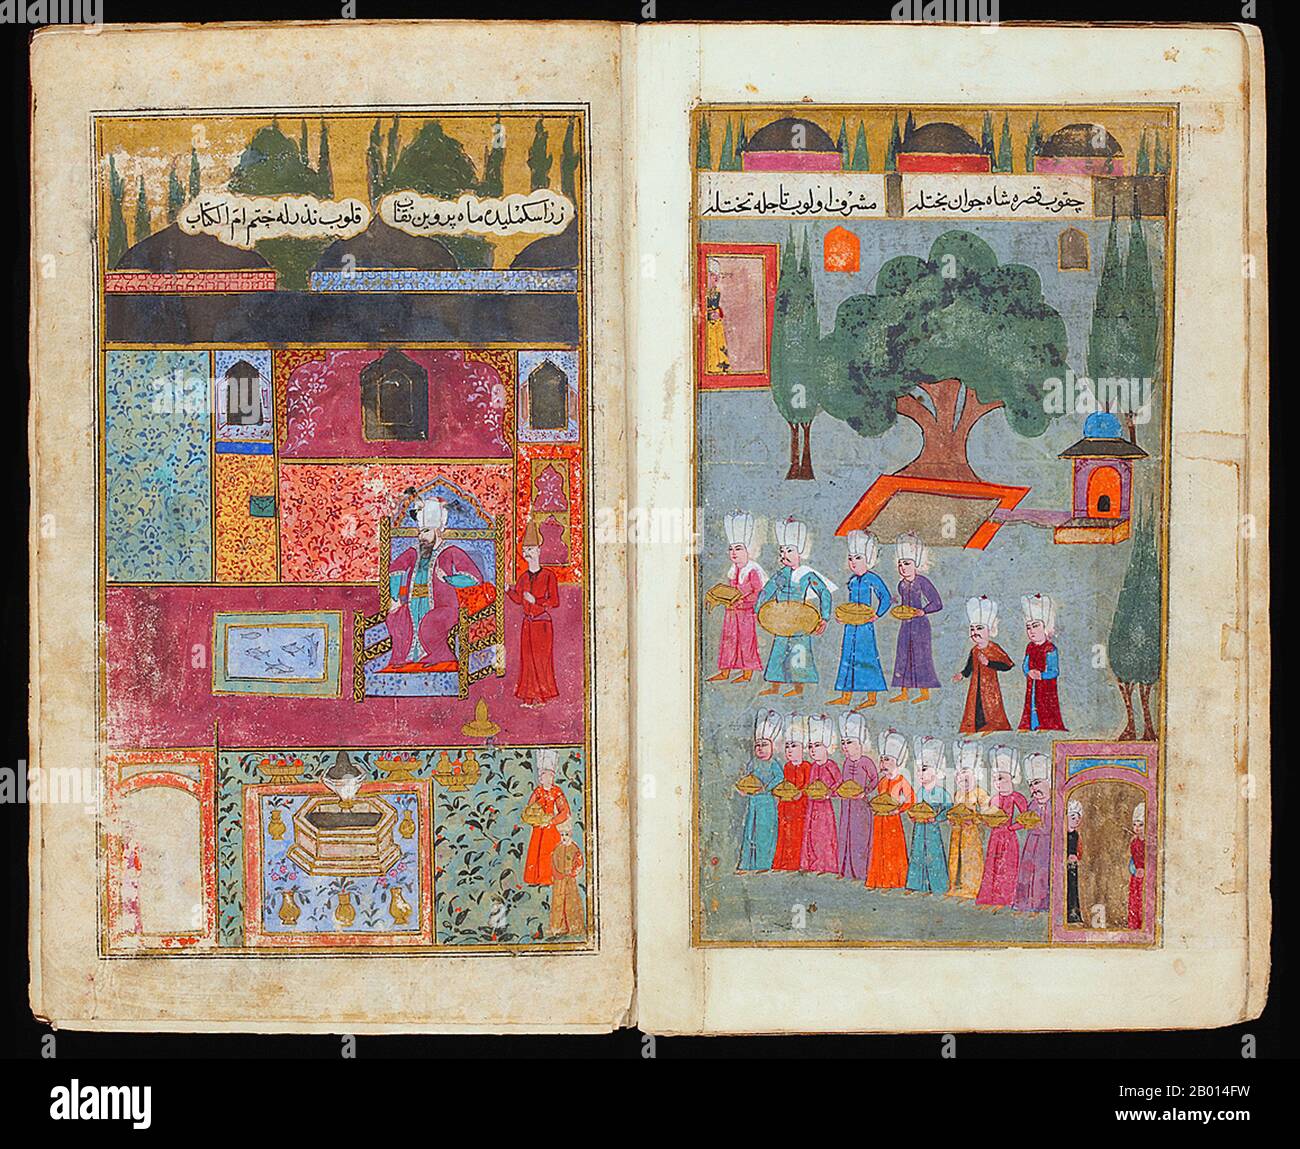 Turkey: 'Mehmed III's coronation in the Topkapi Palace in 1595'. Miniature paintings from an illustrated manuscript depicting the 1595 military campaign in Hungary by Ottoman Sultan Mehmed III, c. 1600.  Mehmed III Adli (May 26, 1566 – December 21/22, 1603) was sultan of the Ottoman Empire from 1595-1603. He remains notorious for having nineteen of his brothers and half brothers murdered to secure power. He also killed over twenty of his sisters. They were all strangled by deaf-mutes. Mehmed III was an idle ruler, leaving government to his mother Safiye. Stock Photo